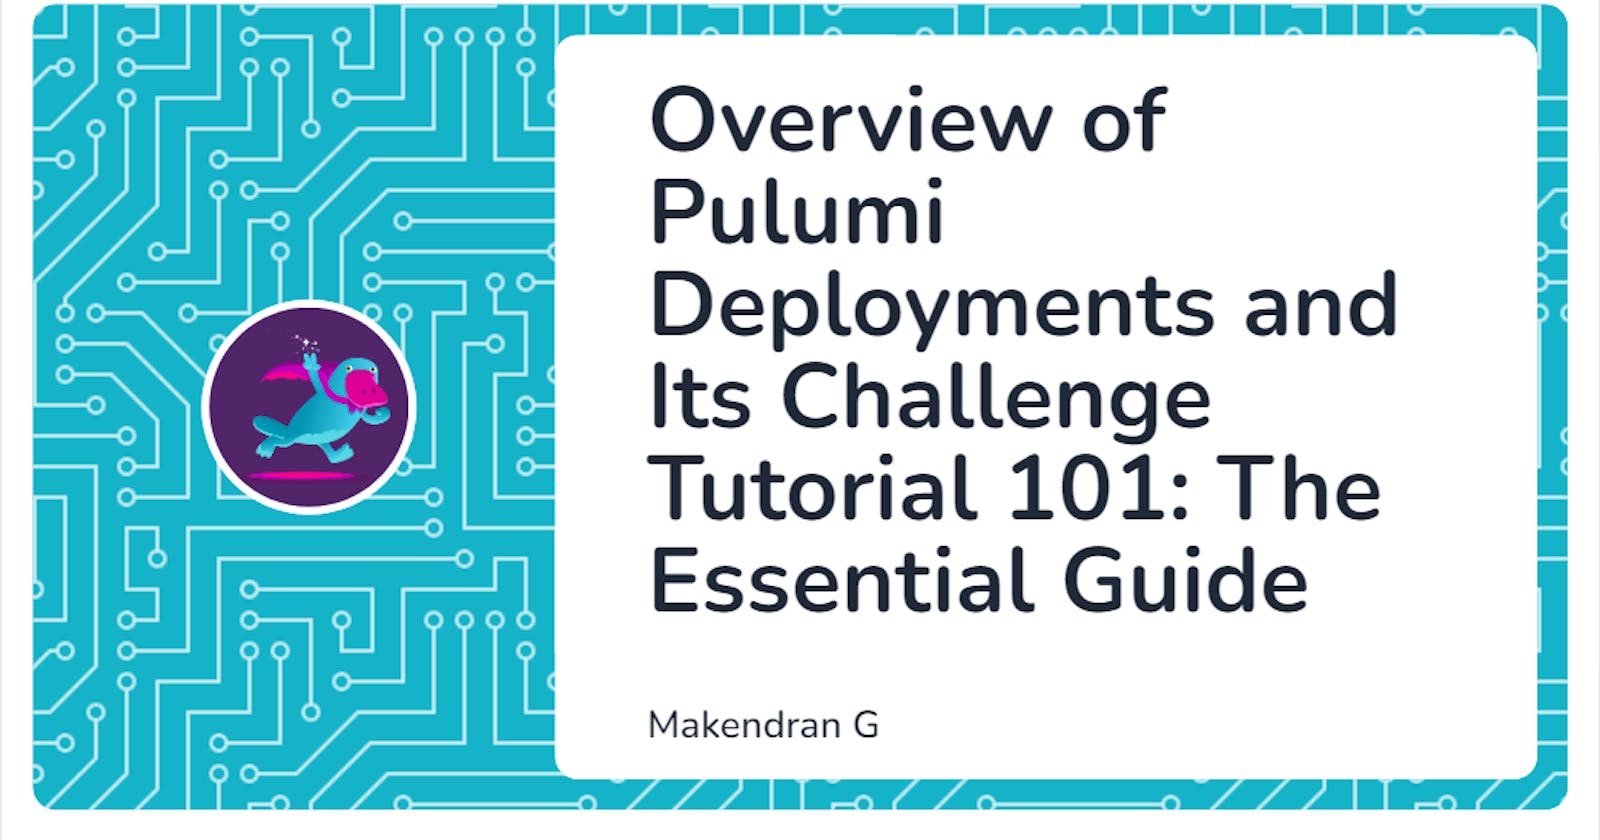 Overview of Pulumi Deployments and Its Challenge Tutorial 101: The Essential Guide